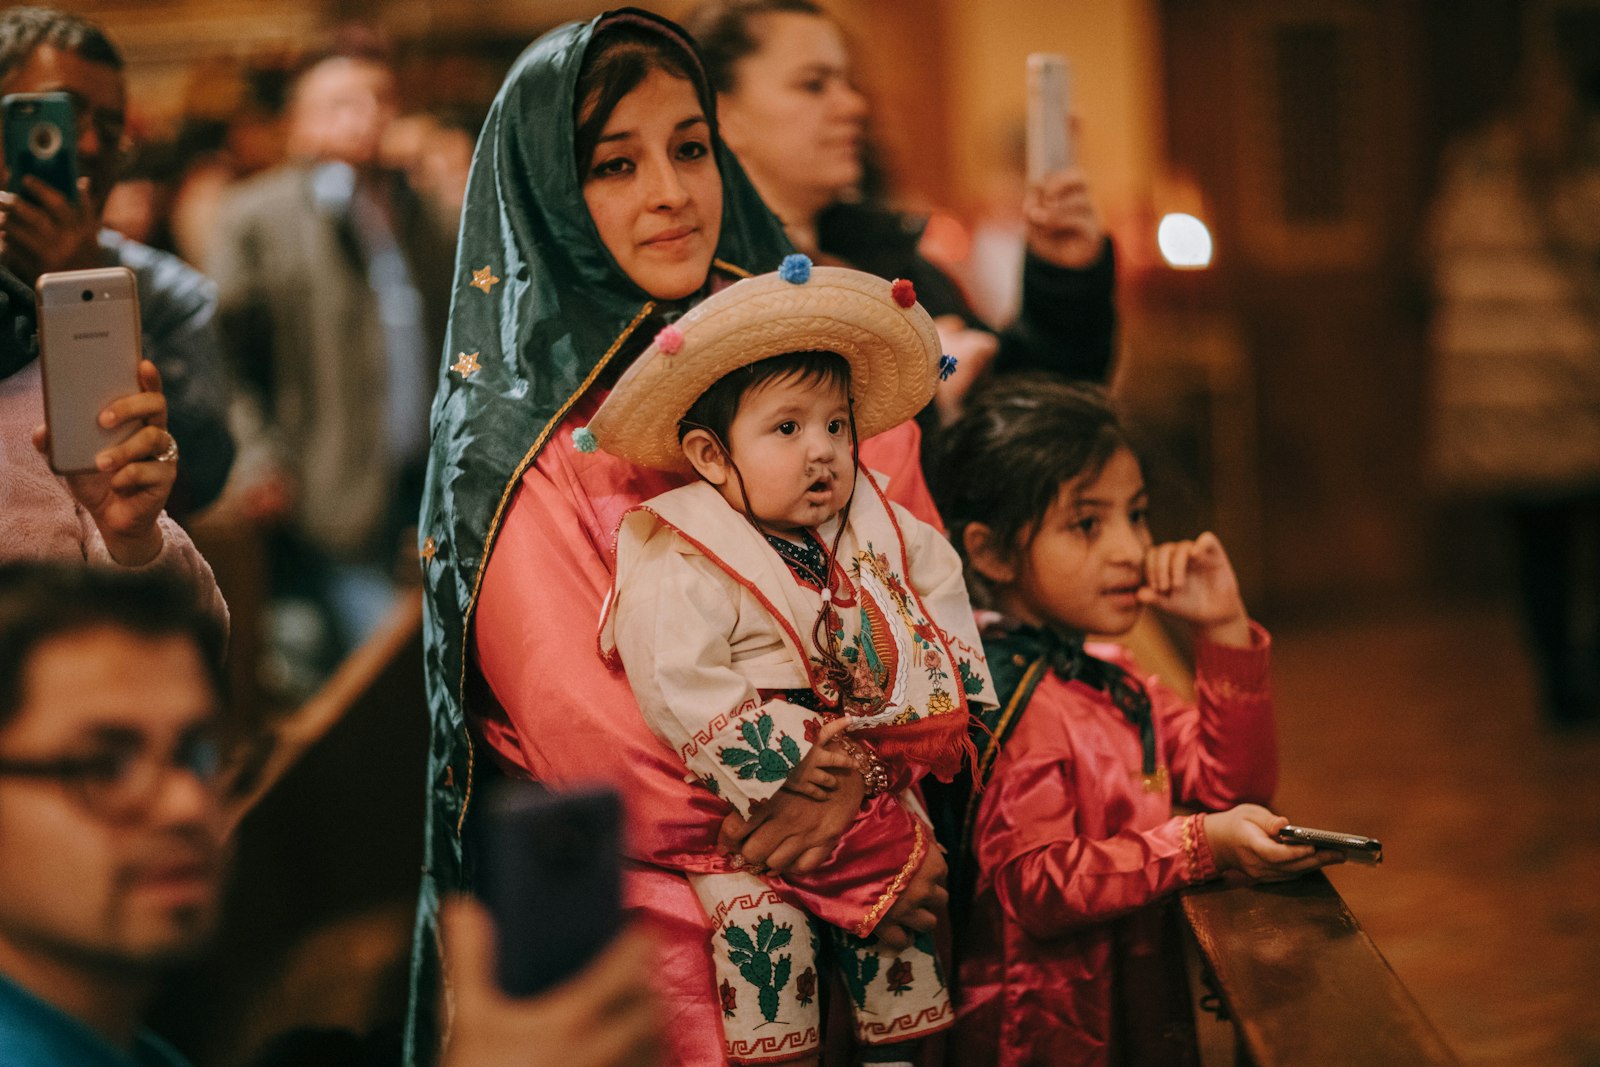 A mother dressed as Our Lady of Guadalupe holds her infant son, dressed as St. Juan Diego, during a celebration of Our Lady of Guadalupe's feast day in 2018 at Holy Redeemer Parish in southwest Detroit. (Naomi Vrazo | Detroit Catholic file photo)